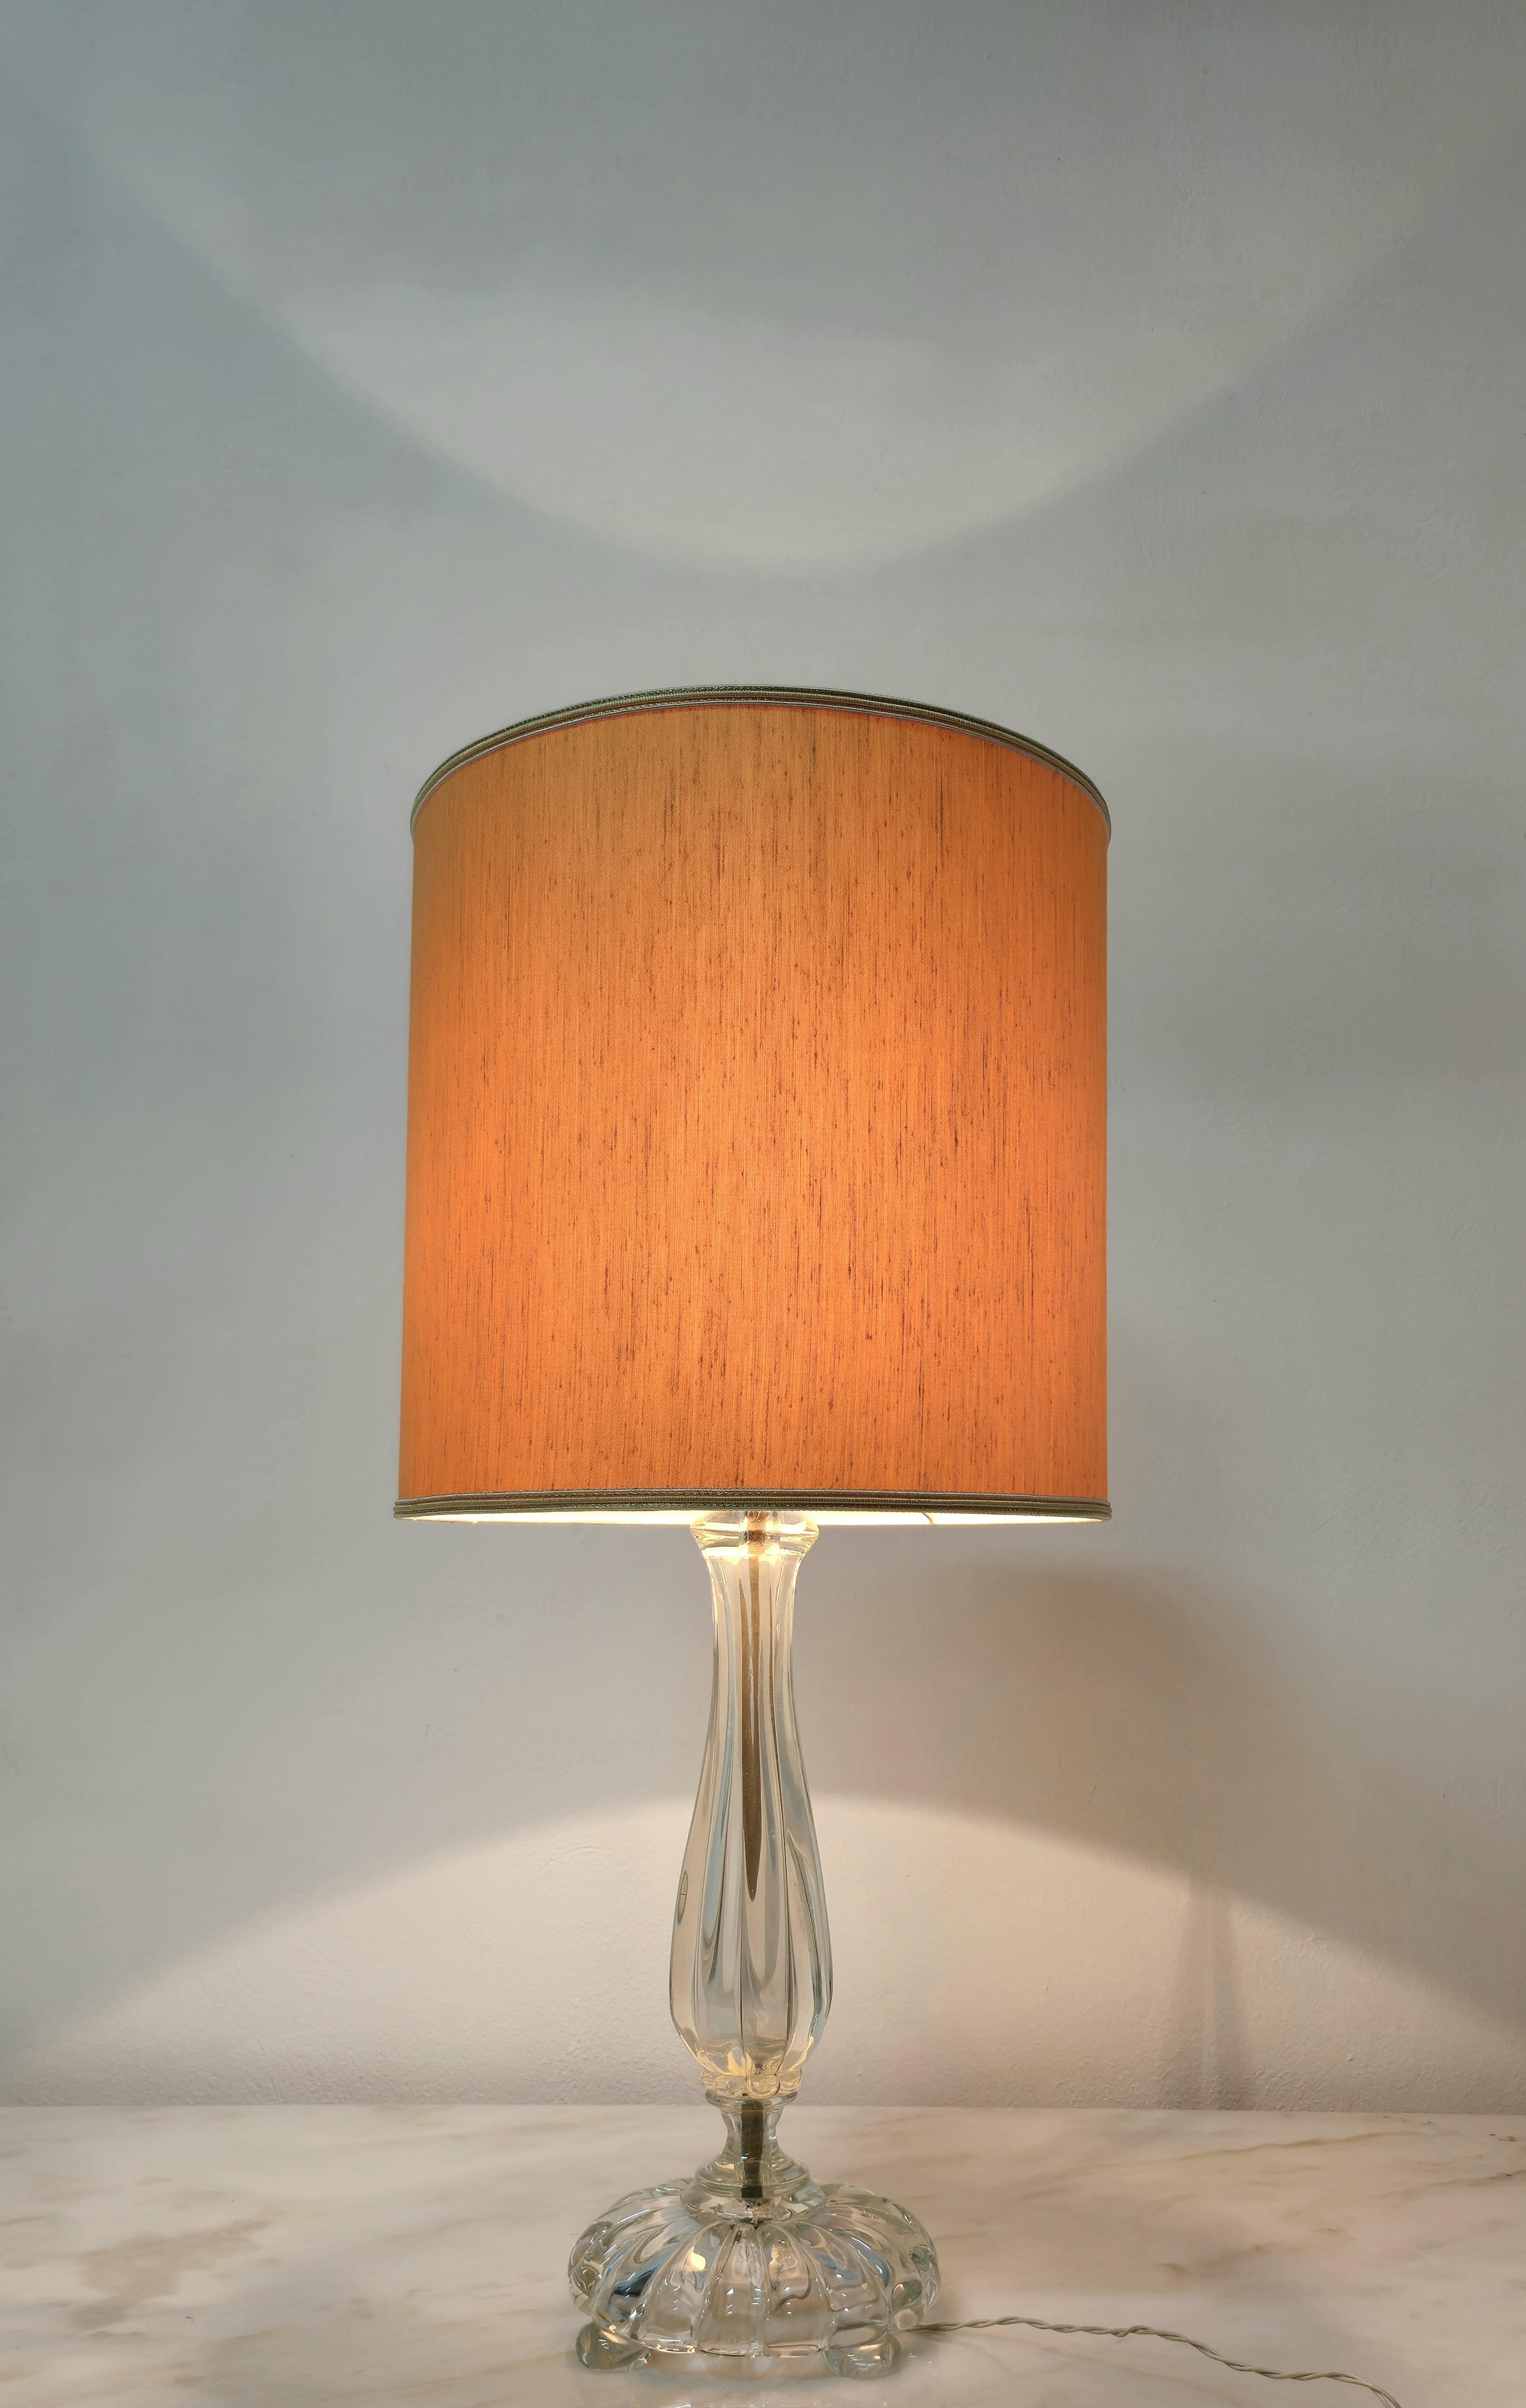 Elegant table lamp by Seguso produced in Italy in the 1940s.
The lamp was made of transparent Murano glass with a cylindrical fabric lampshade, in shades of yellow.



Note: We try to offer our customers an excellent service even in shipments all